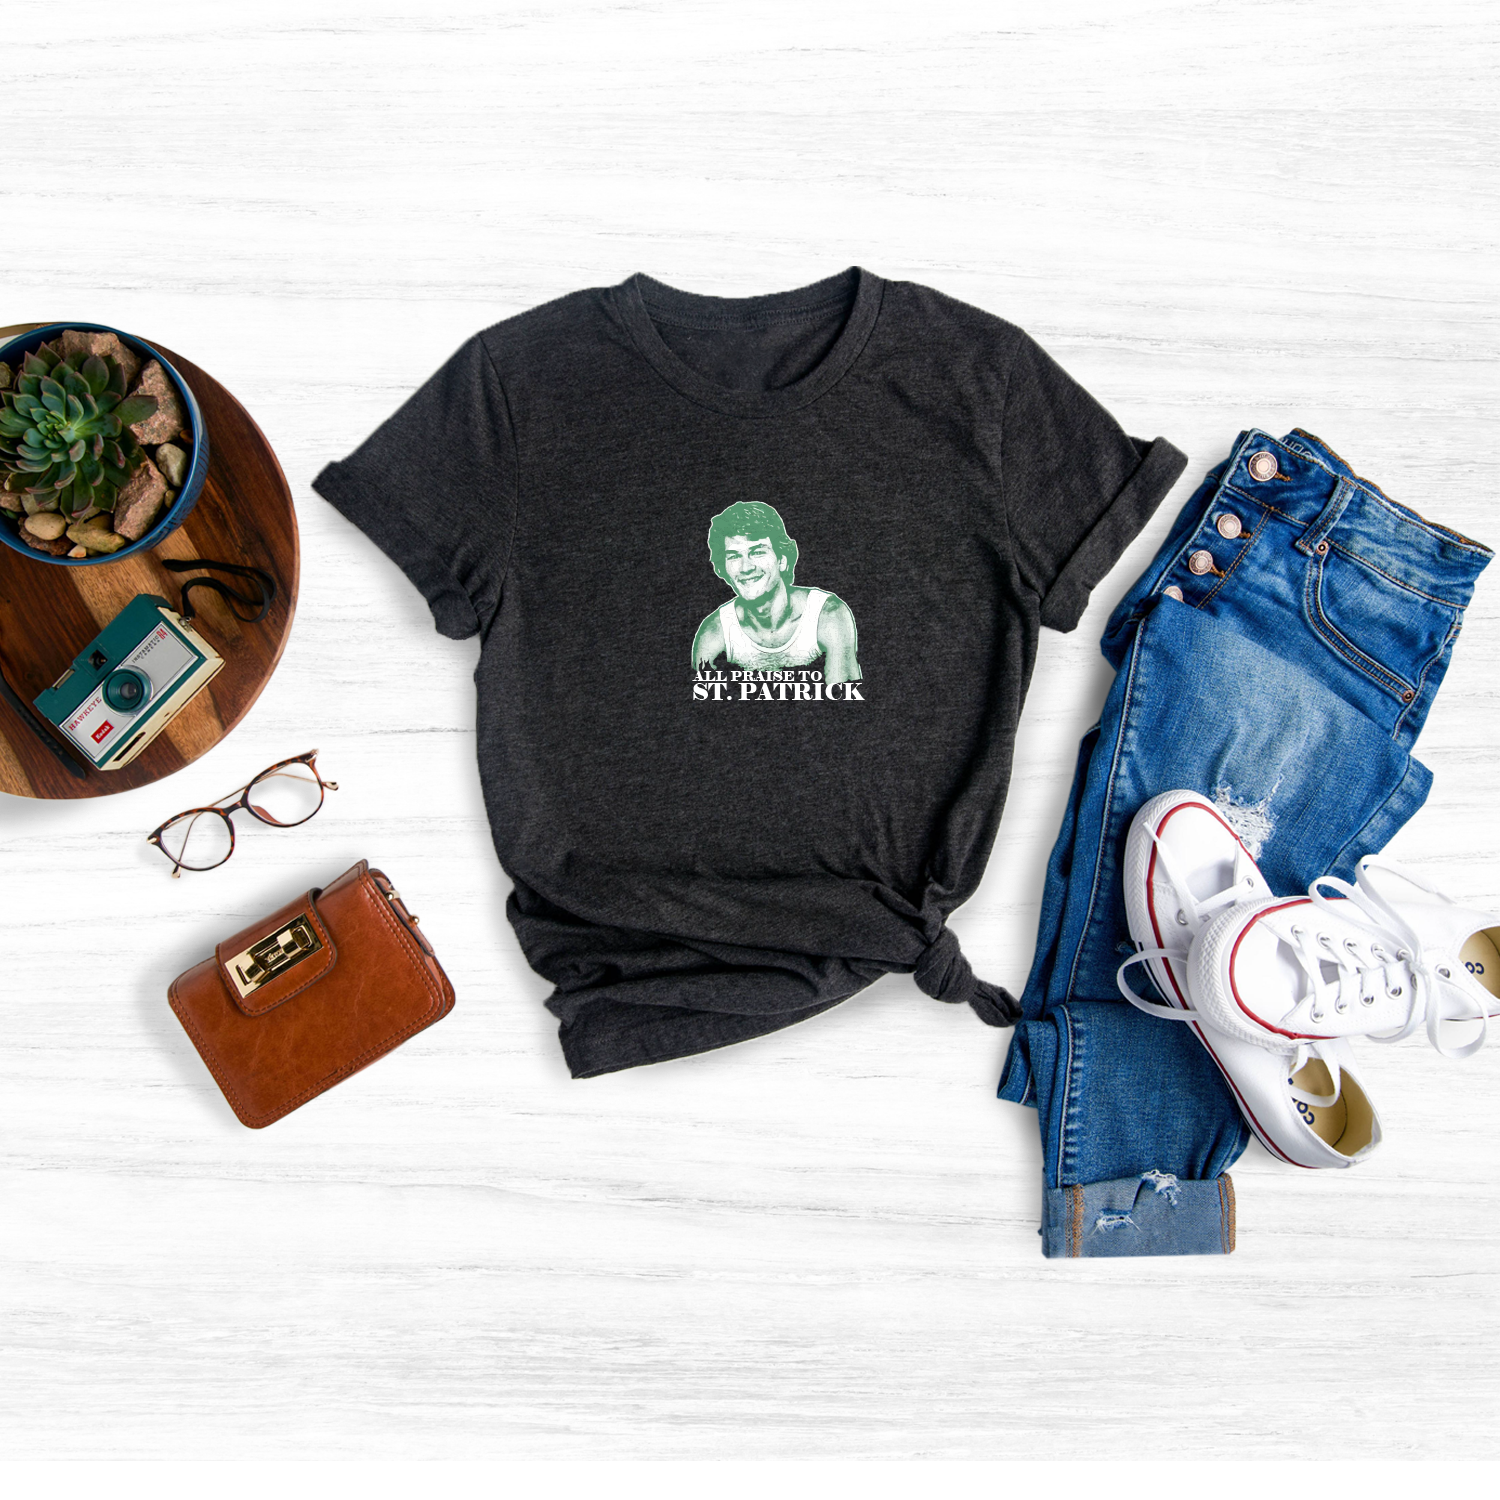 Celebrate St. Patrick's Day with a twist with this humorous "All Praise Saint Patrick" tee.